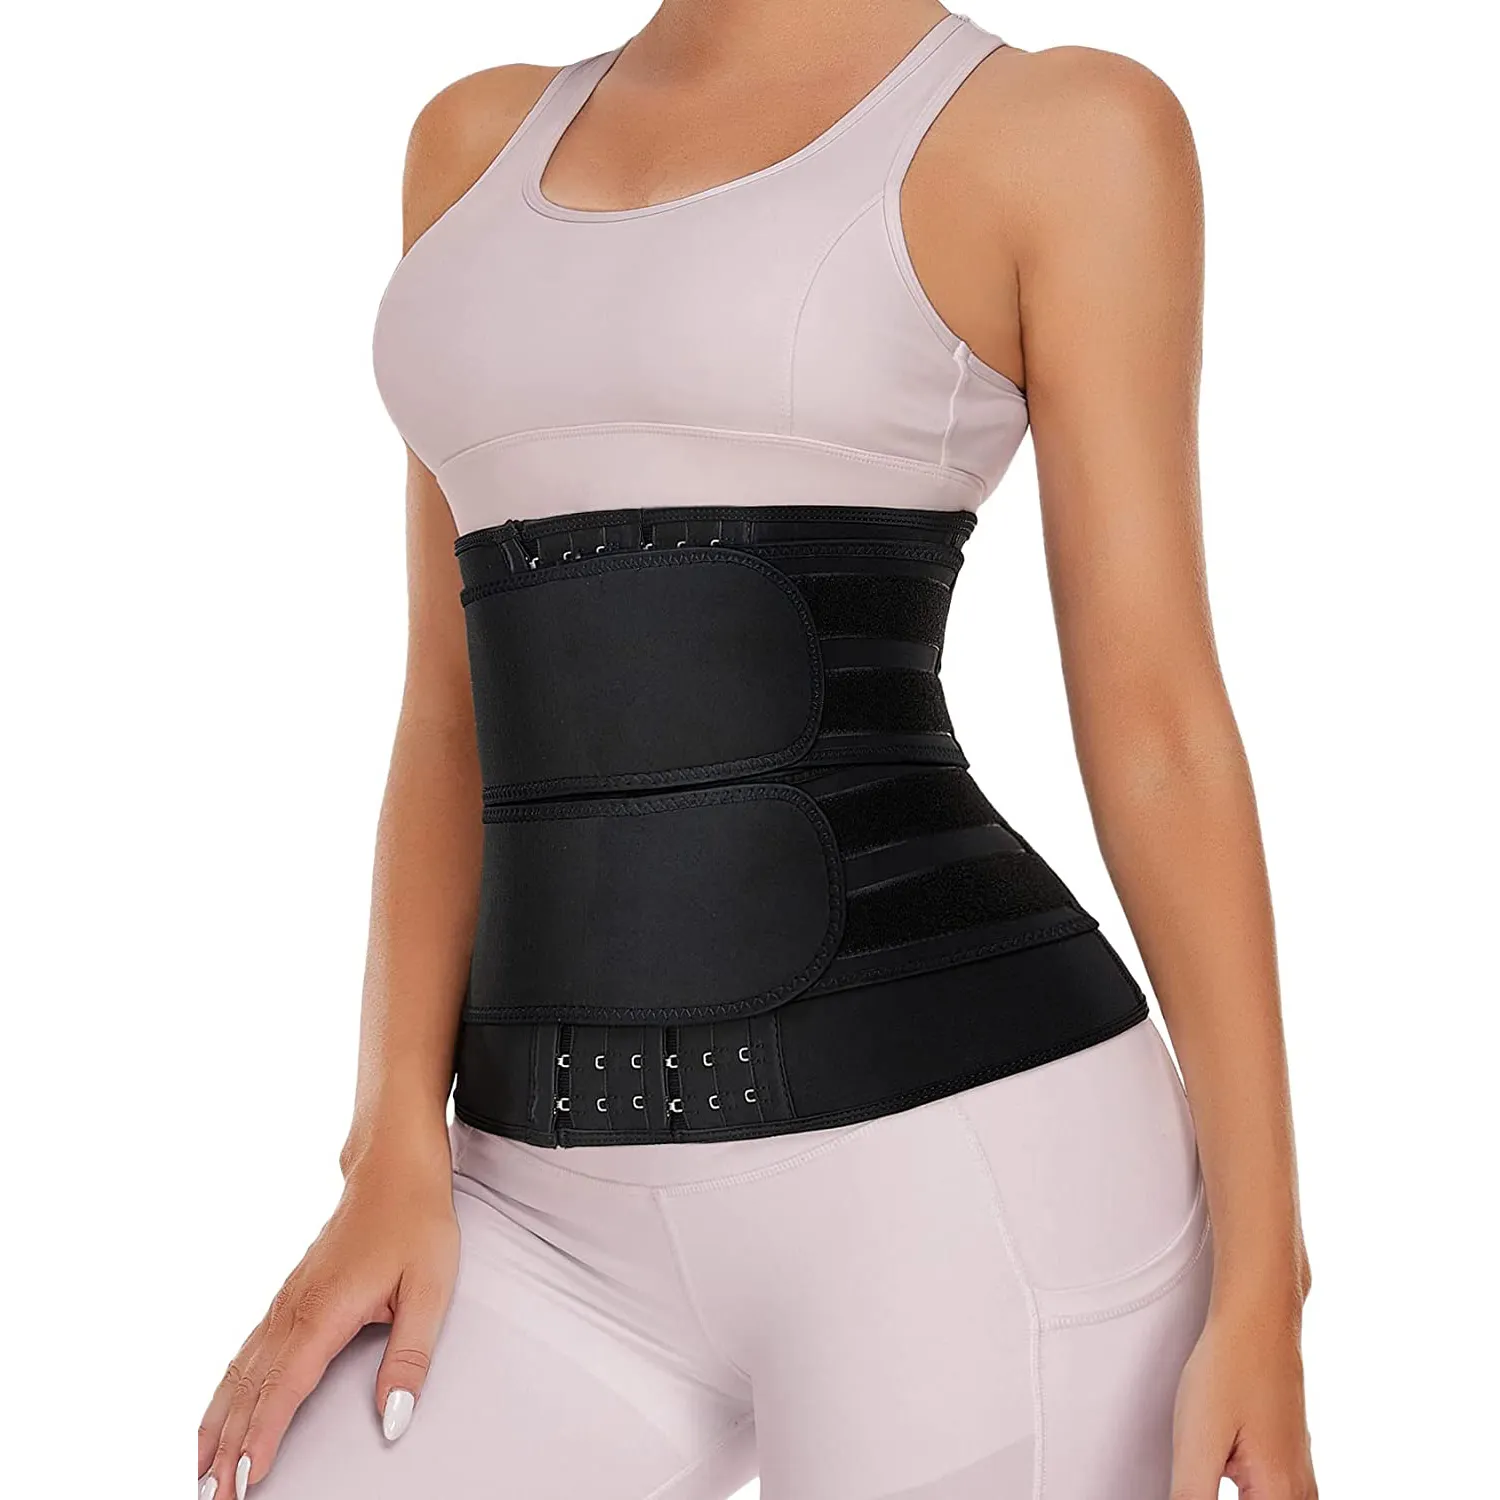 Adjustable Waist Weight Loss Trimmer Slimming Belt Fat Burning Exercise Belly Body Shaper Wrap Band Support Wholesale